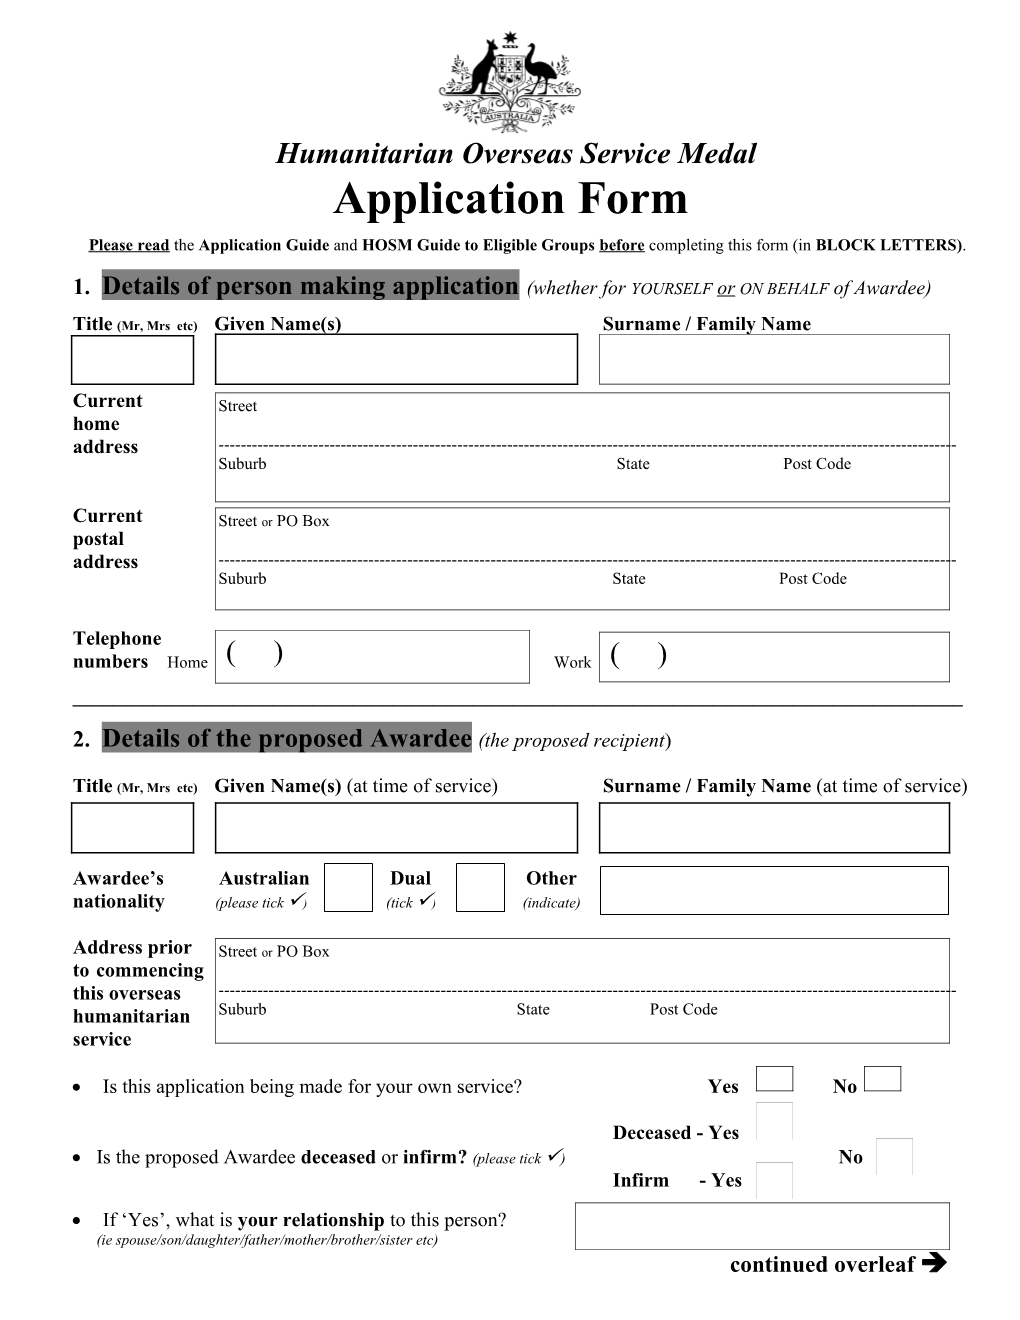 Humanitarian Overseas Service Medal Application Form